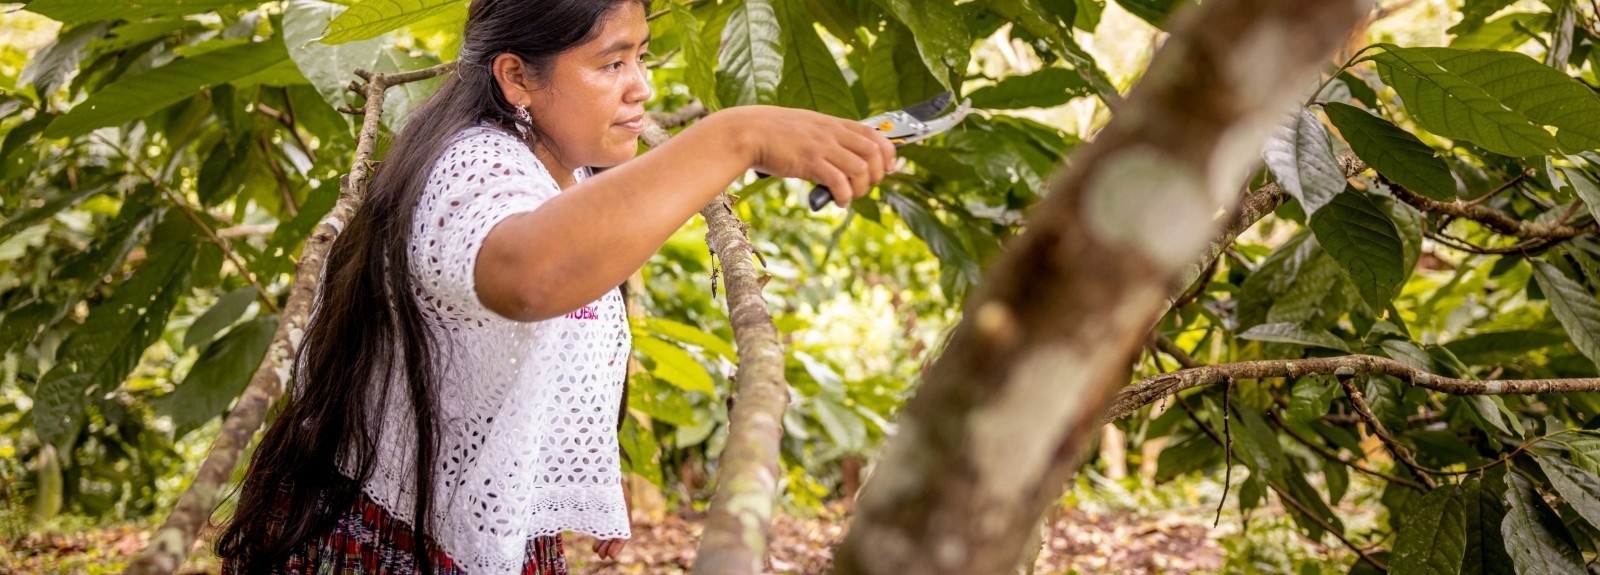 A young Guatemalan woman is among cacao trees and is using a tool to prune a branch